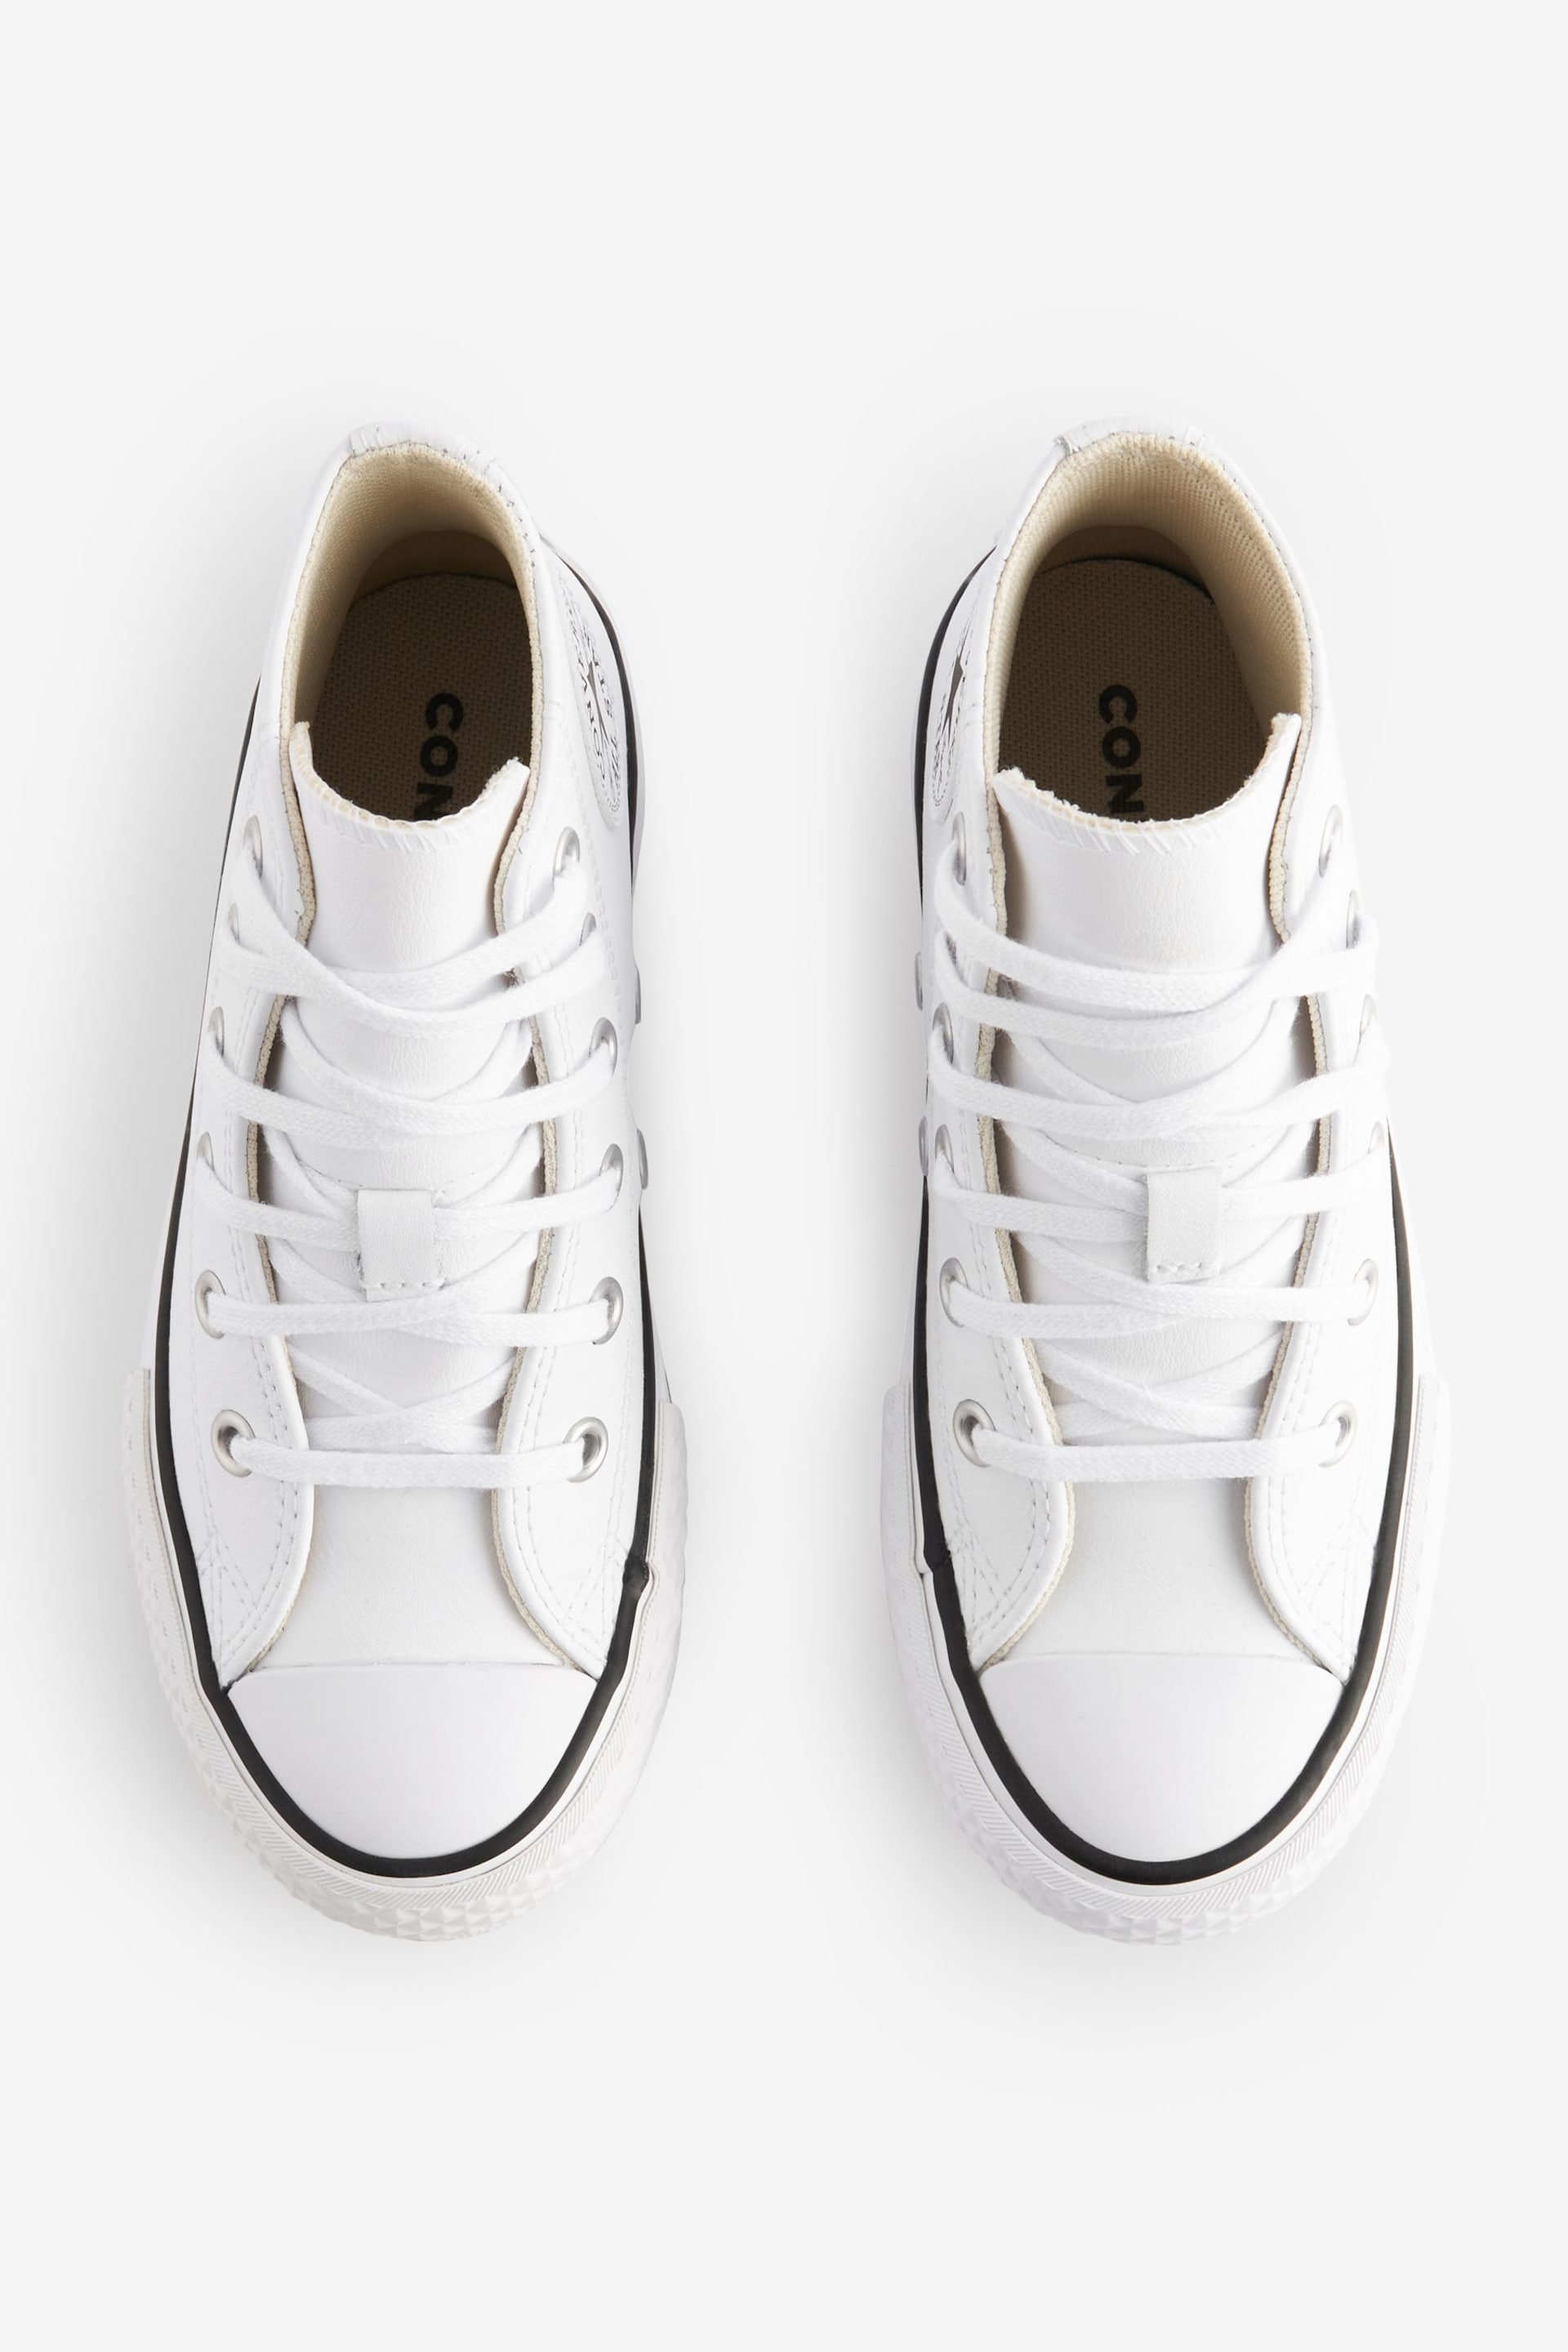 Converse White Junior All Star EVA Lift Leather Trainers - Image 5 of 8